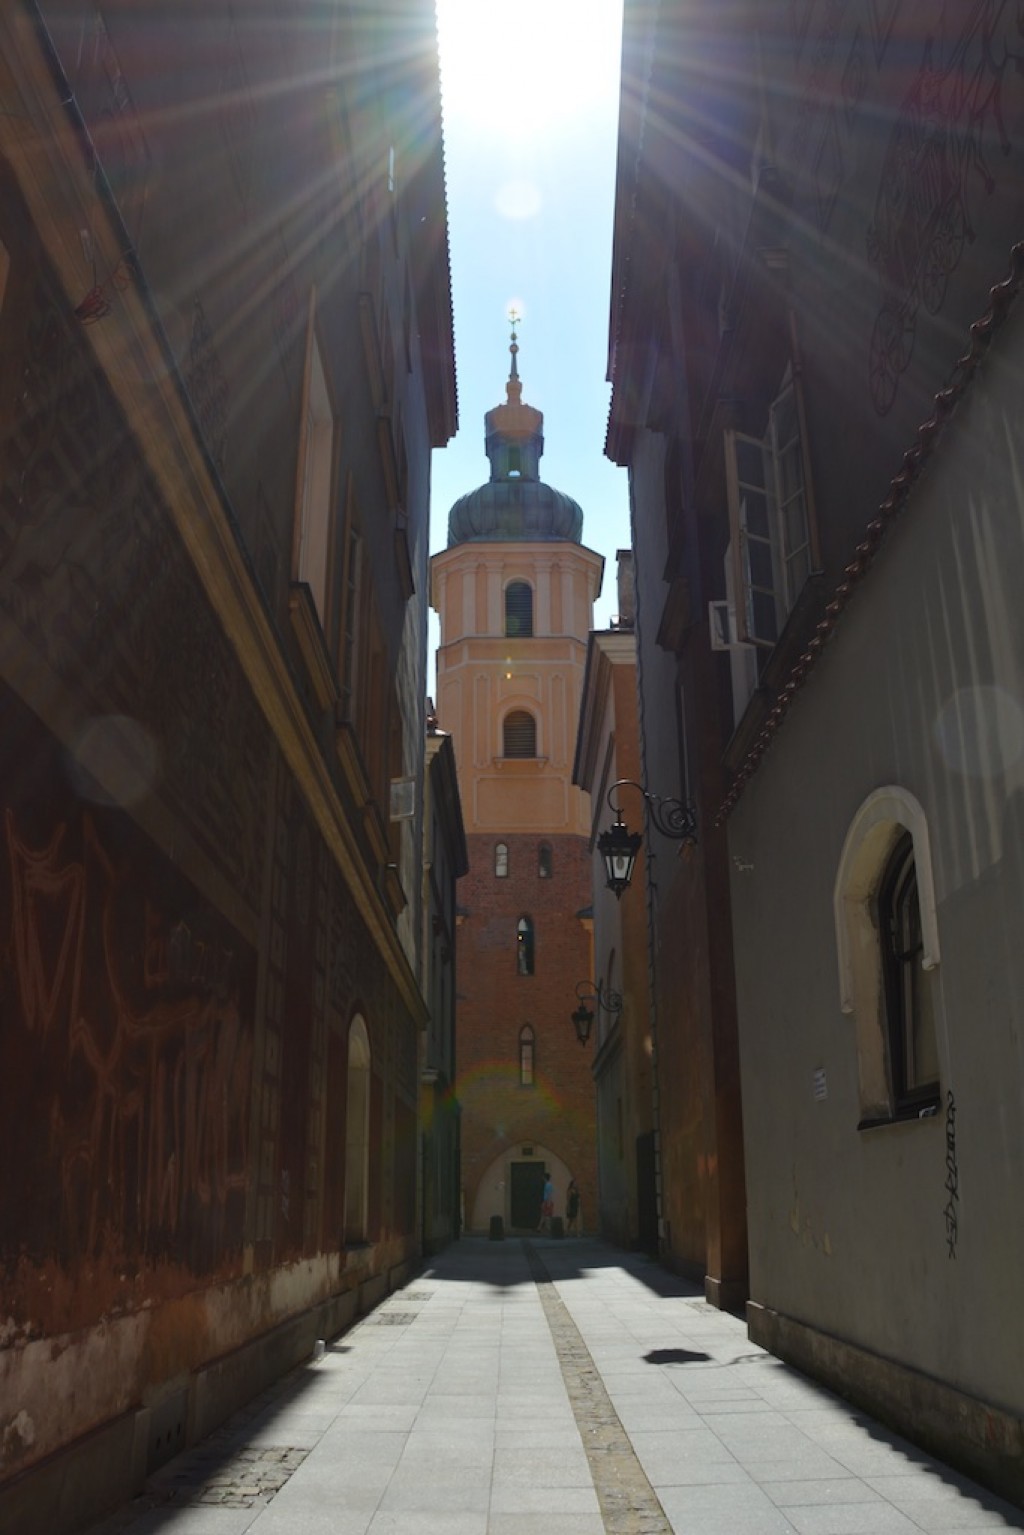 To be honest, we weren't really expecting to enjoy Warsaw, but it really surprised us.  The old town was full of surprises and very tastefully rebuilt, and easy to explore and enjoy on foot. 